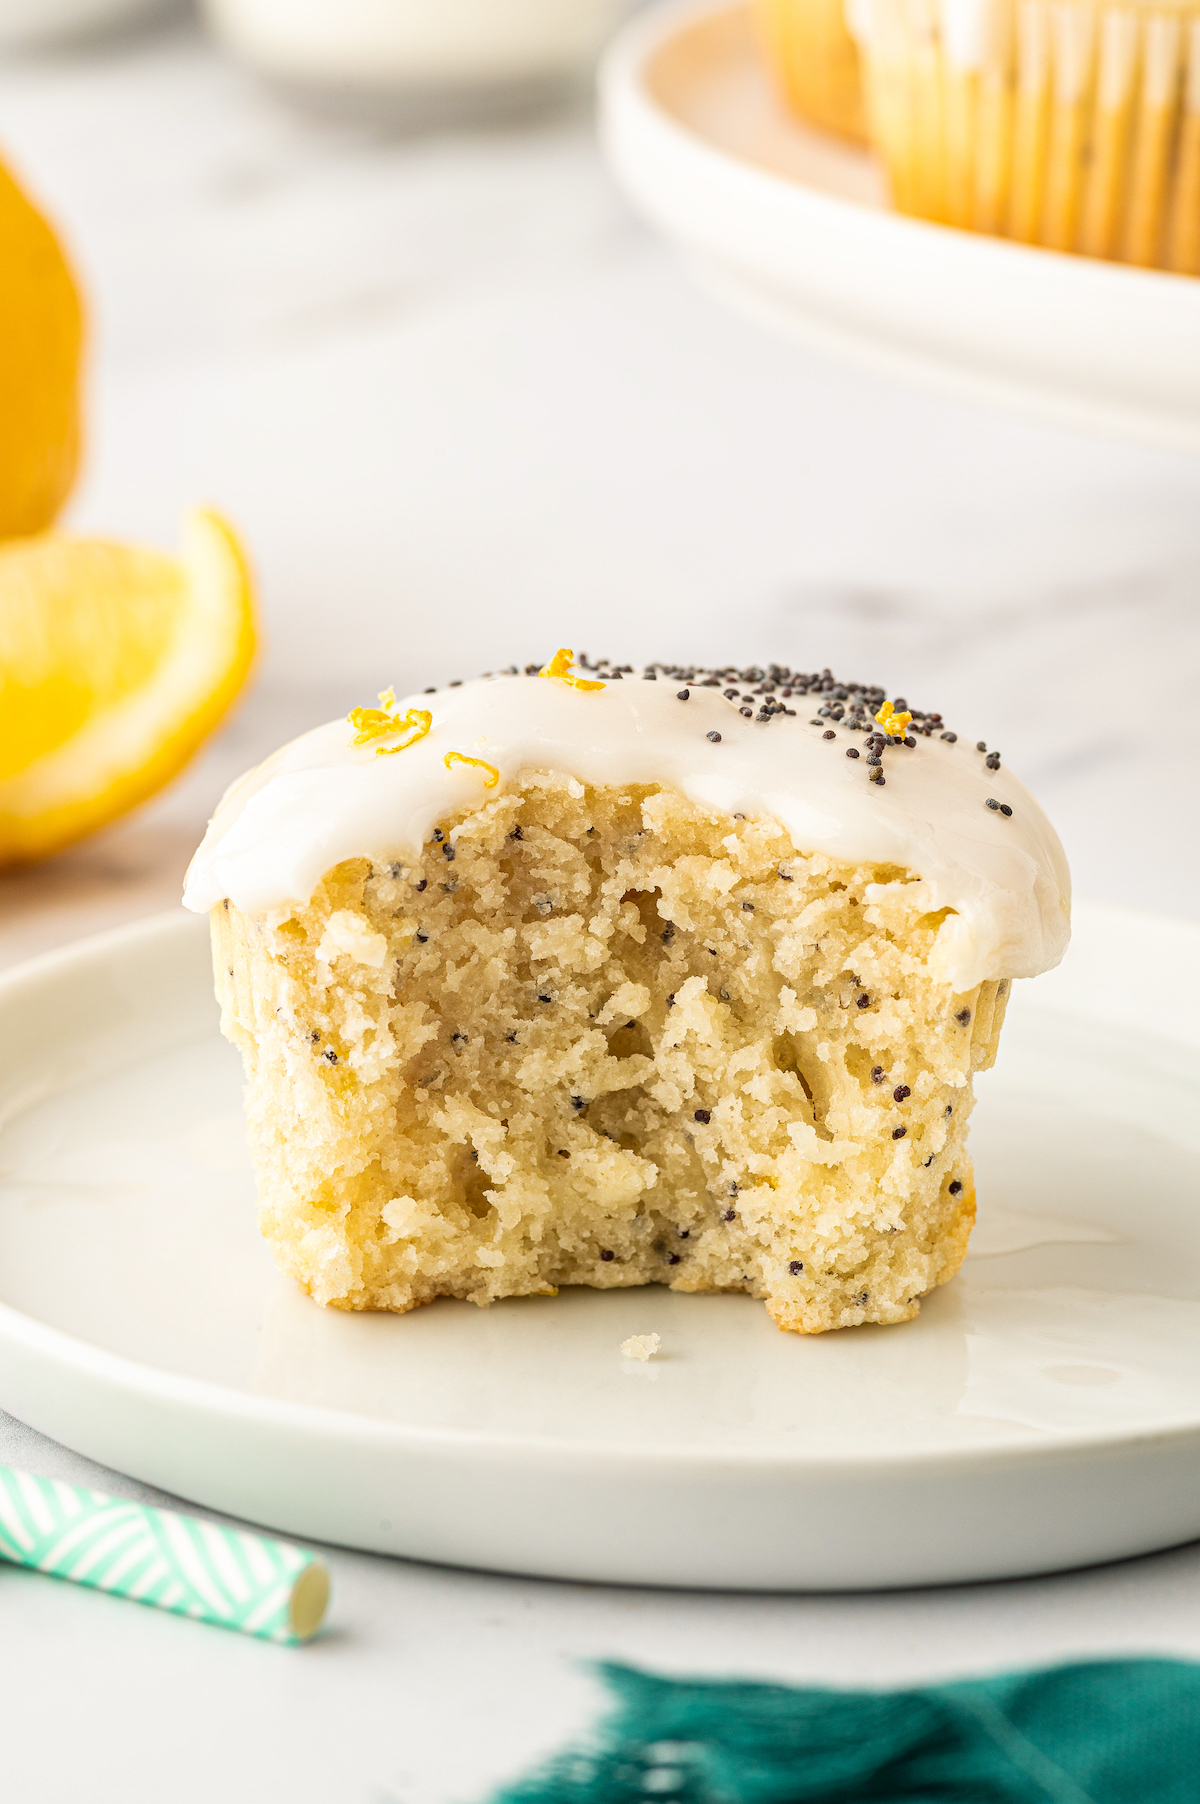 A lemon poppy seed muffin with a bite taken out of it.